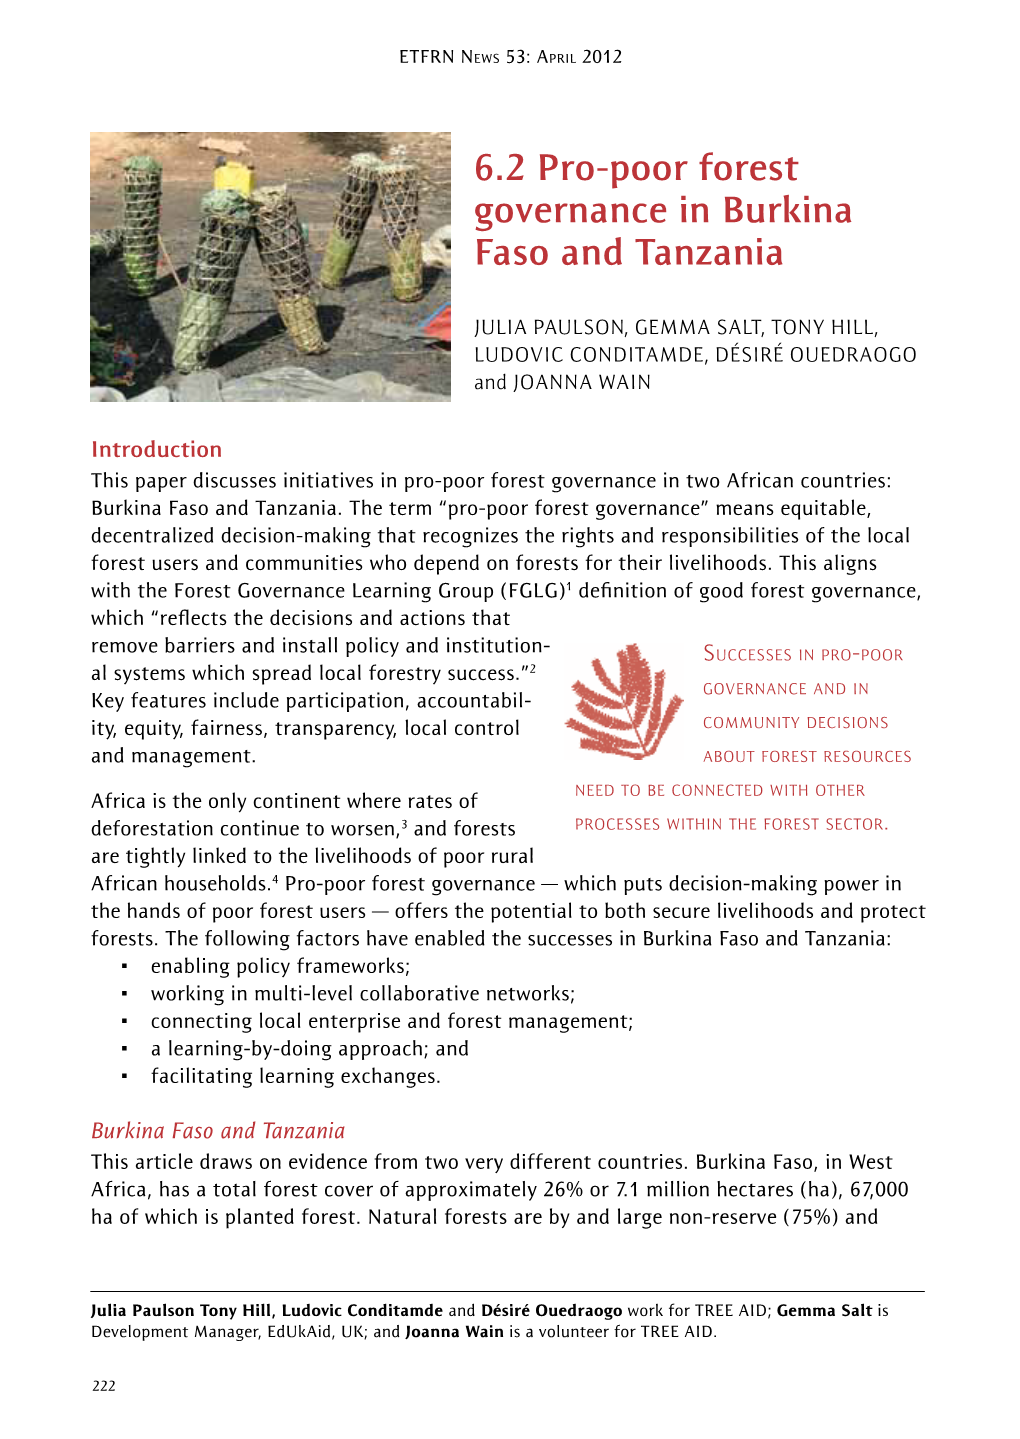 6.2 Pro-Poor Forest Governance in Burkina Faso and Tanzania